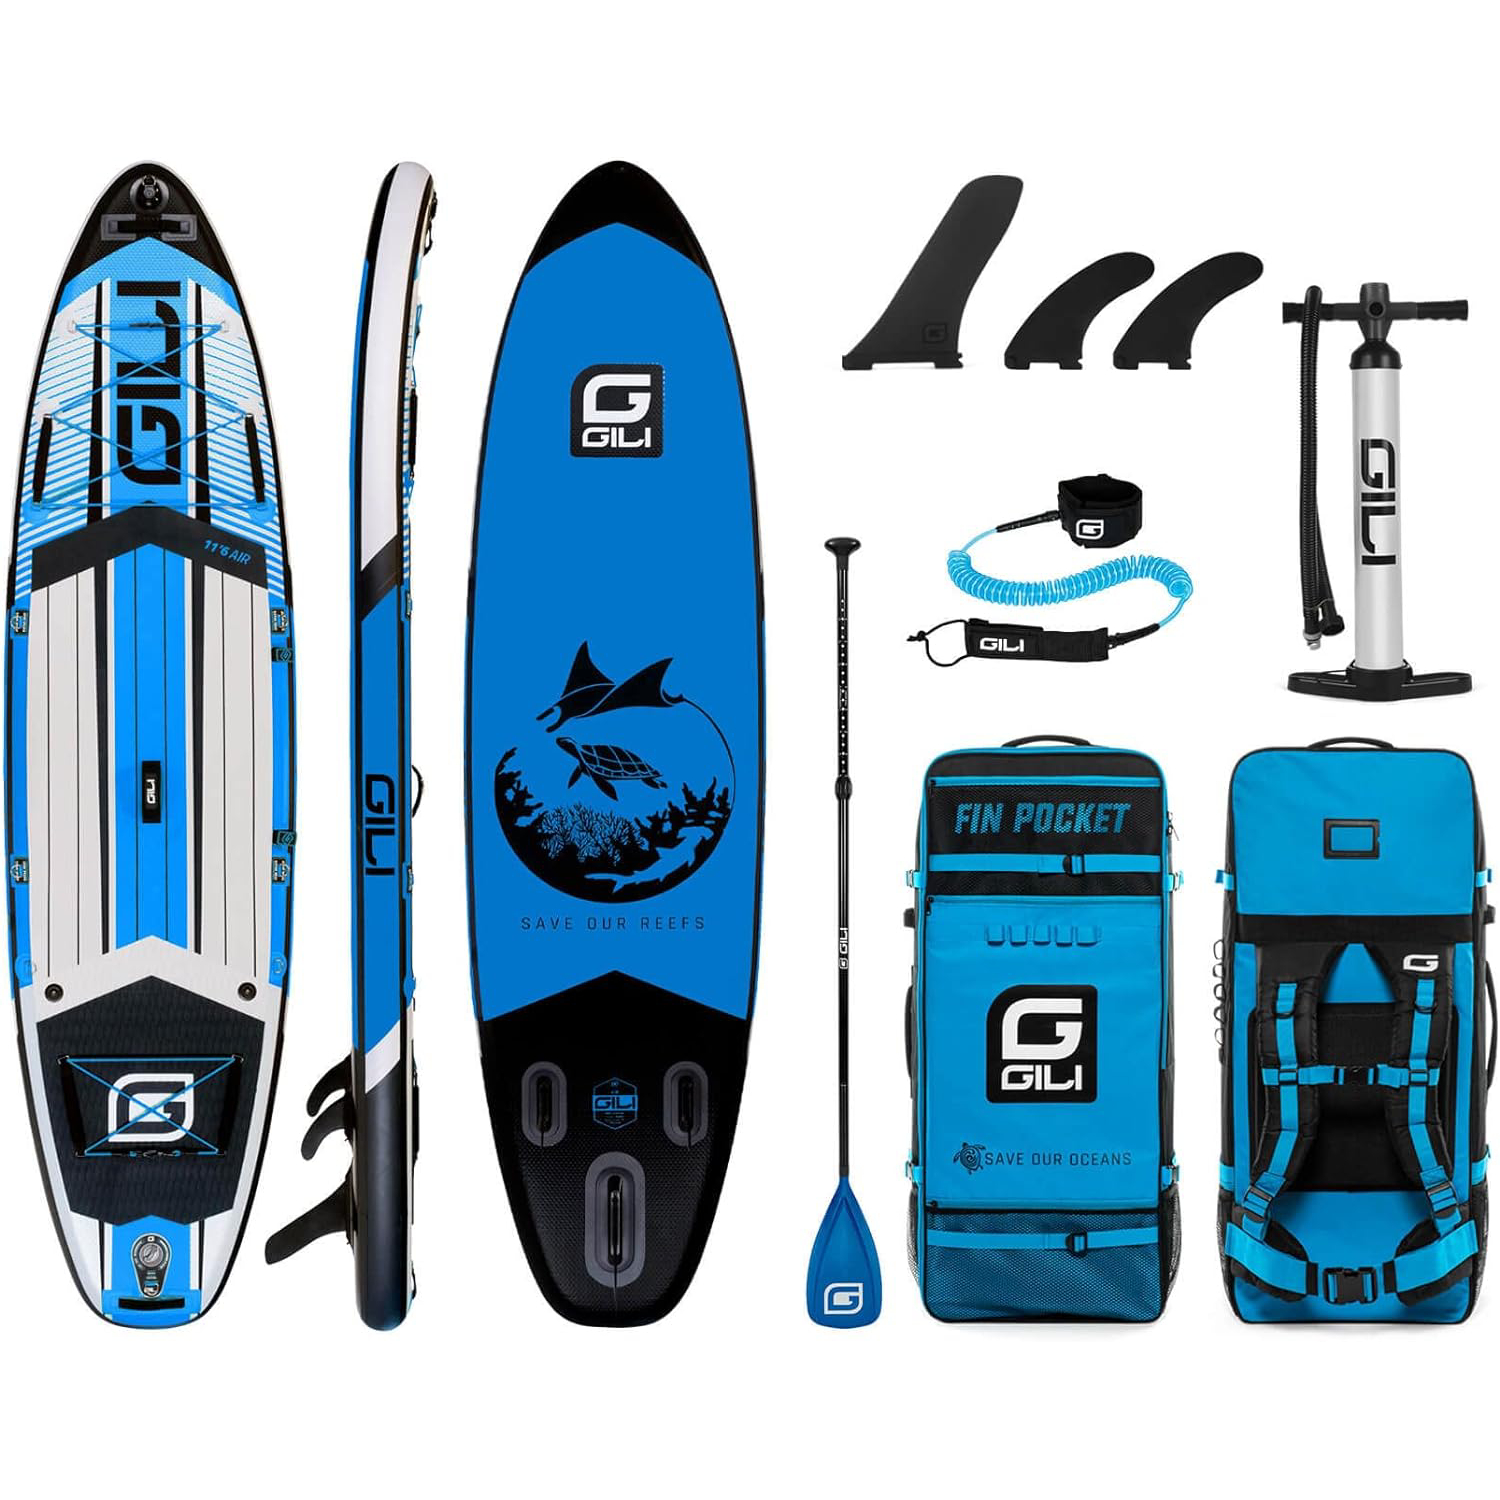 GILI Air Inflatable Stand Up Paddle Board Package